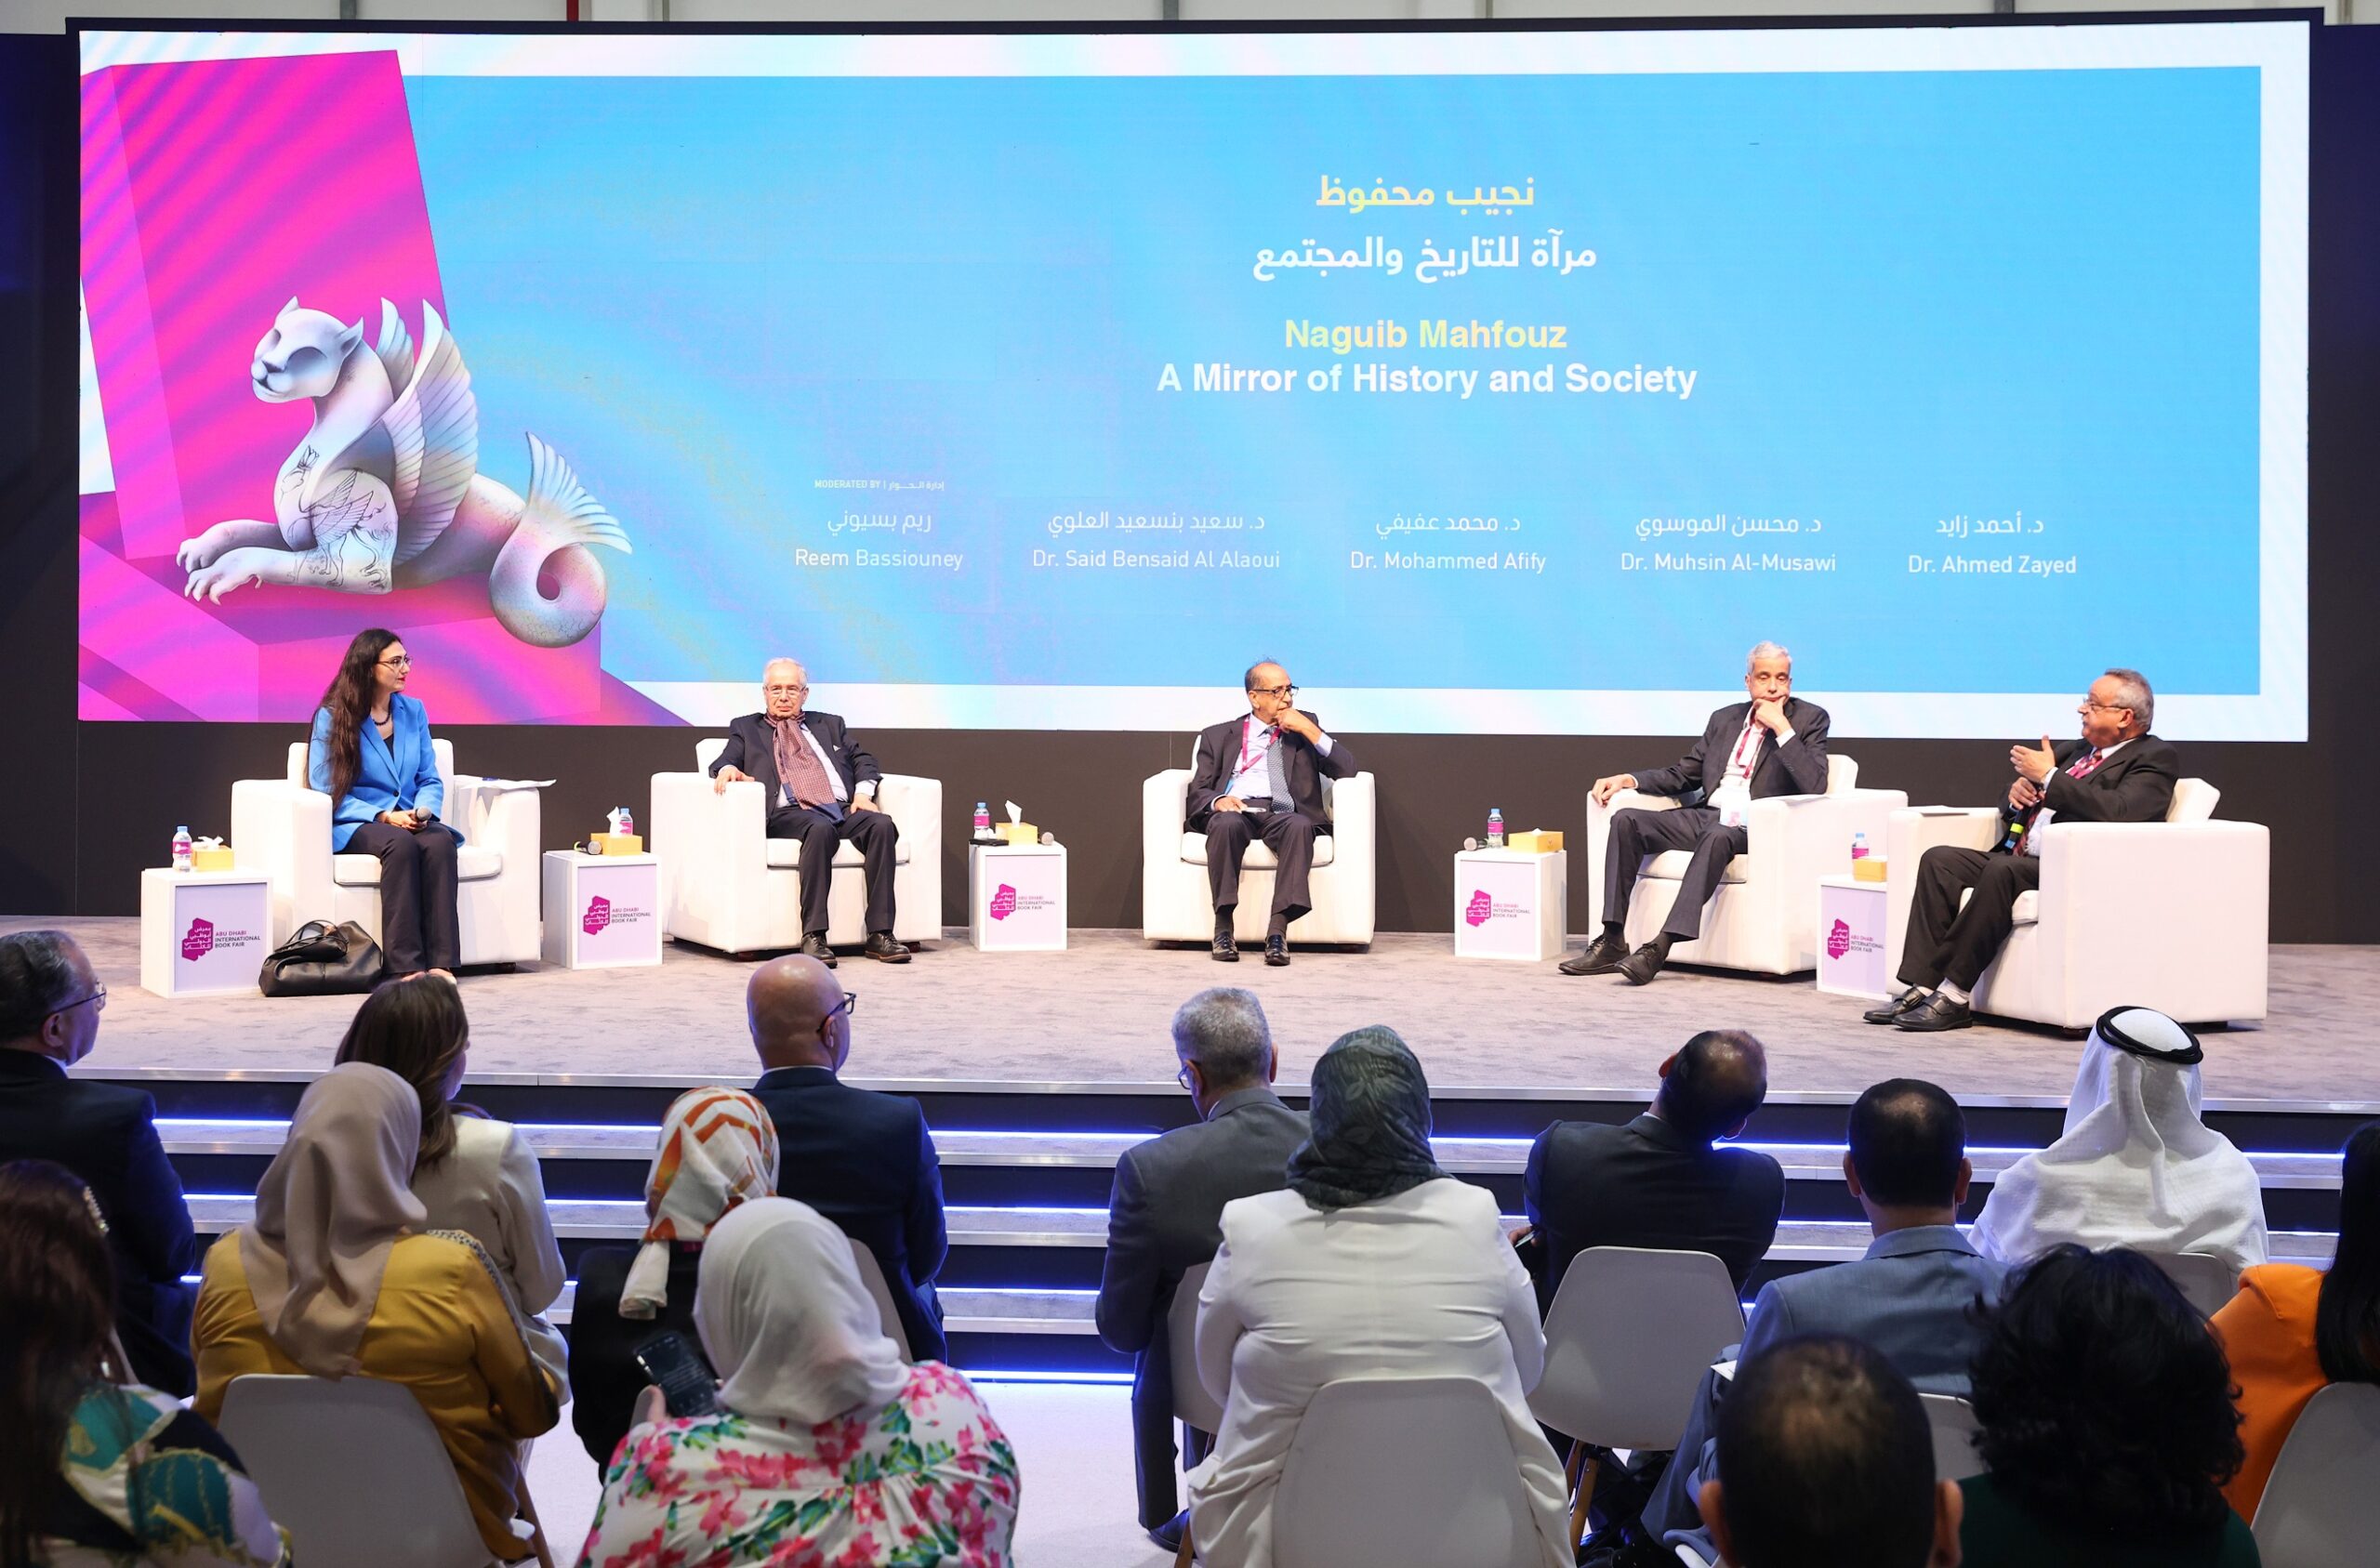 Abu Dhabi International Book Fair 2024: Renowned intellectuals analyse interplay of history and society in Naguib Mahfouz’s works